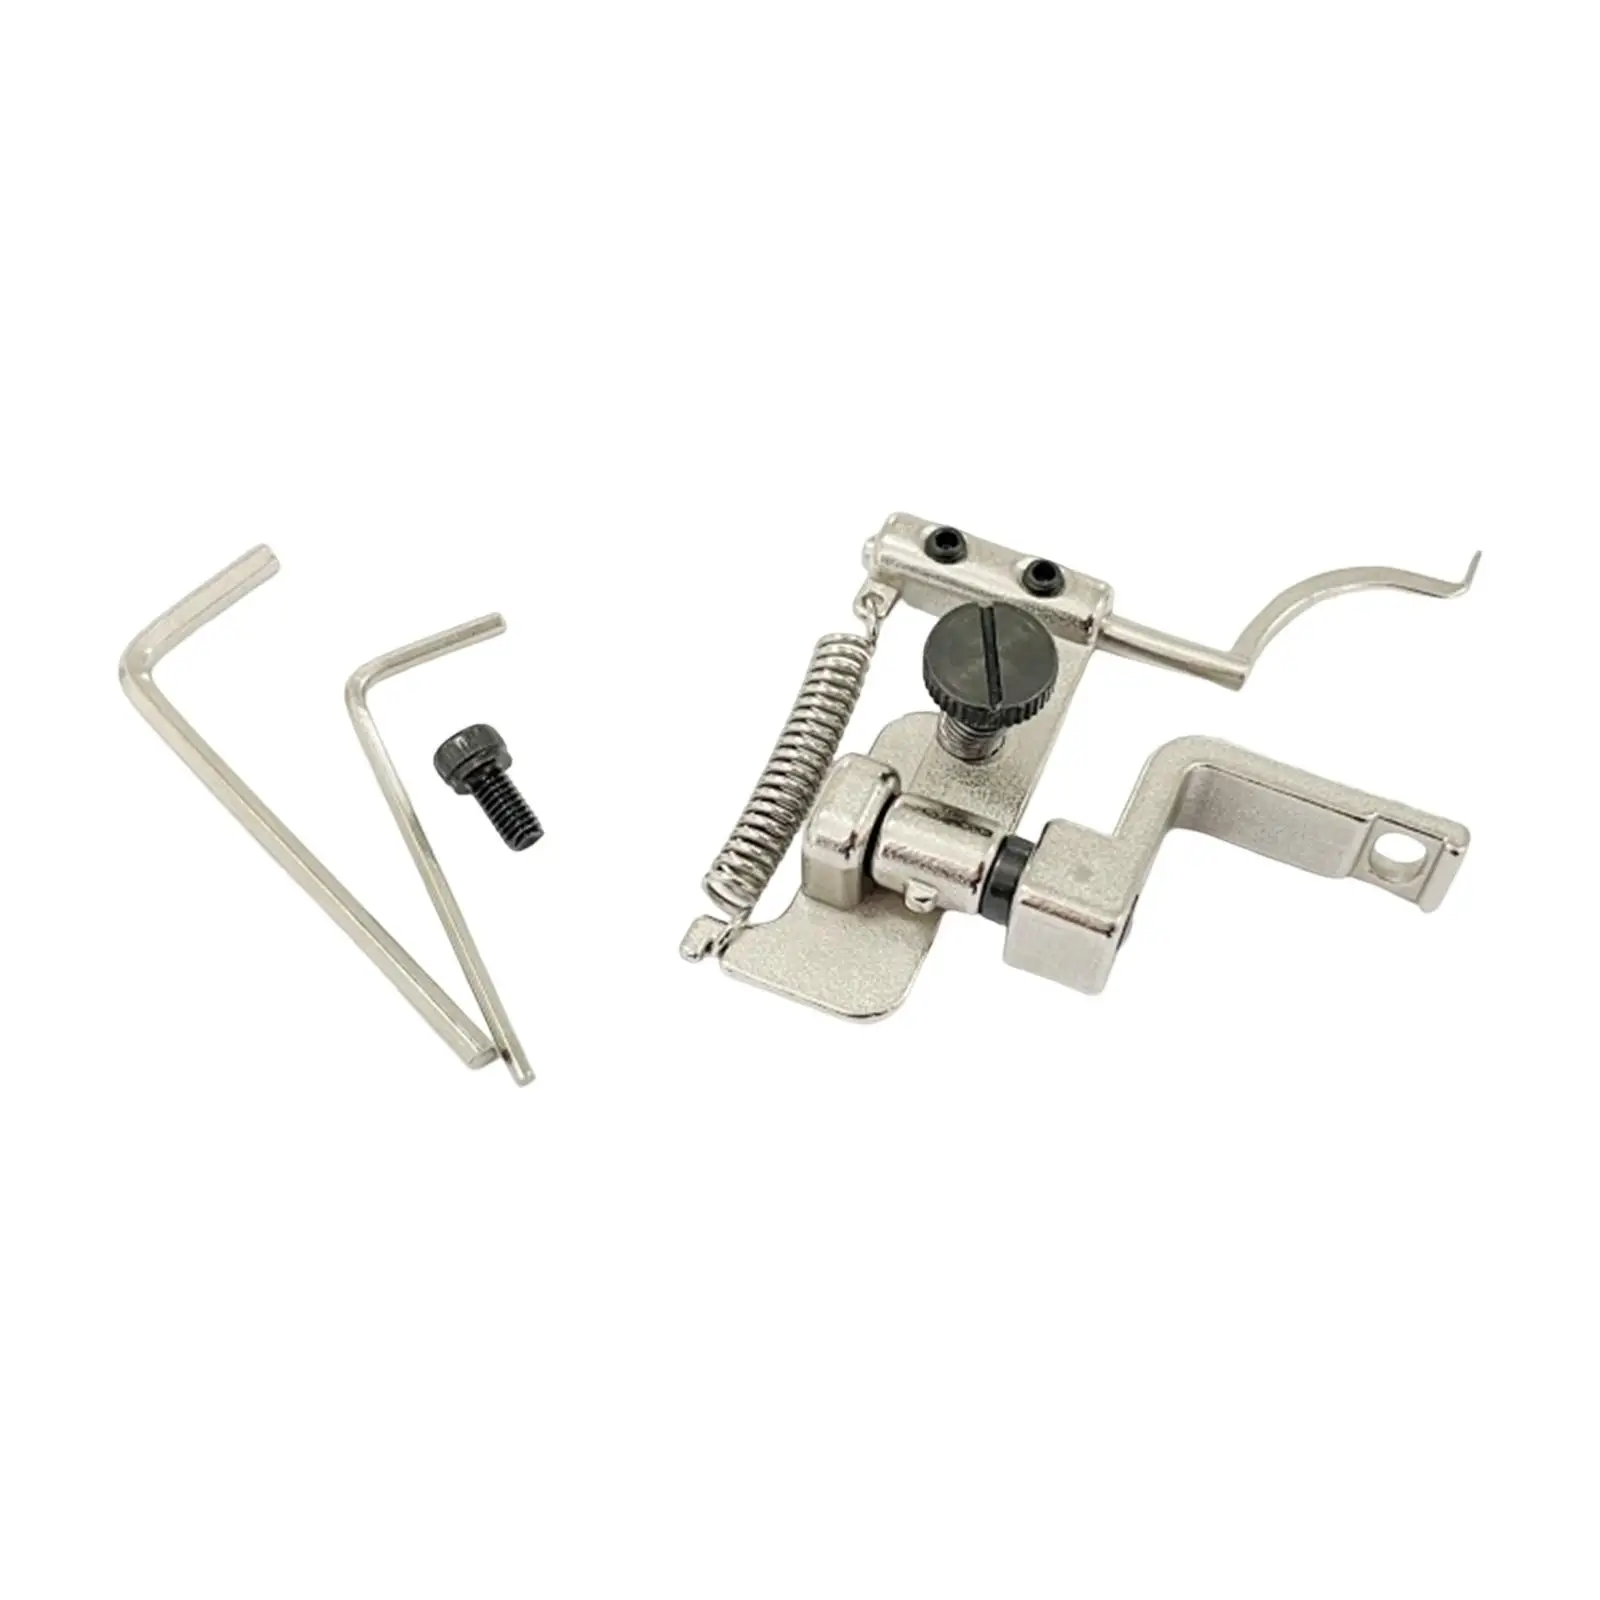 Suspended Edge Guide Sewing Machine Accessories Universal Accessories Parts Hem Guide for Sewing Quilting 591 891 Beginners